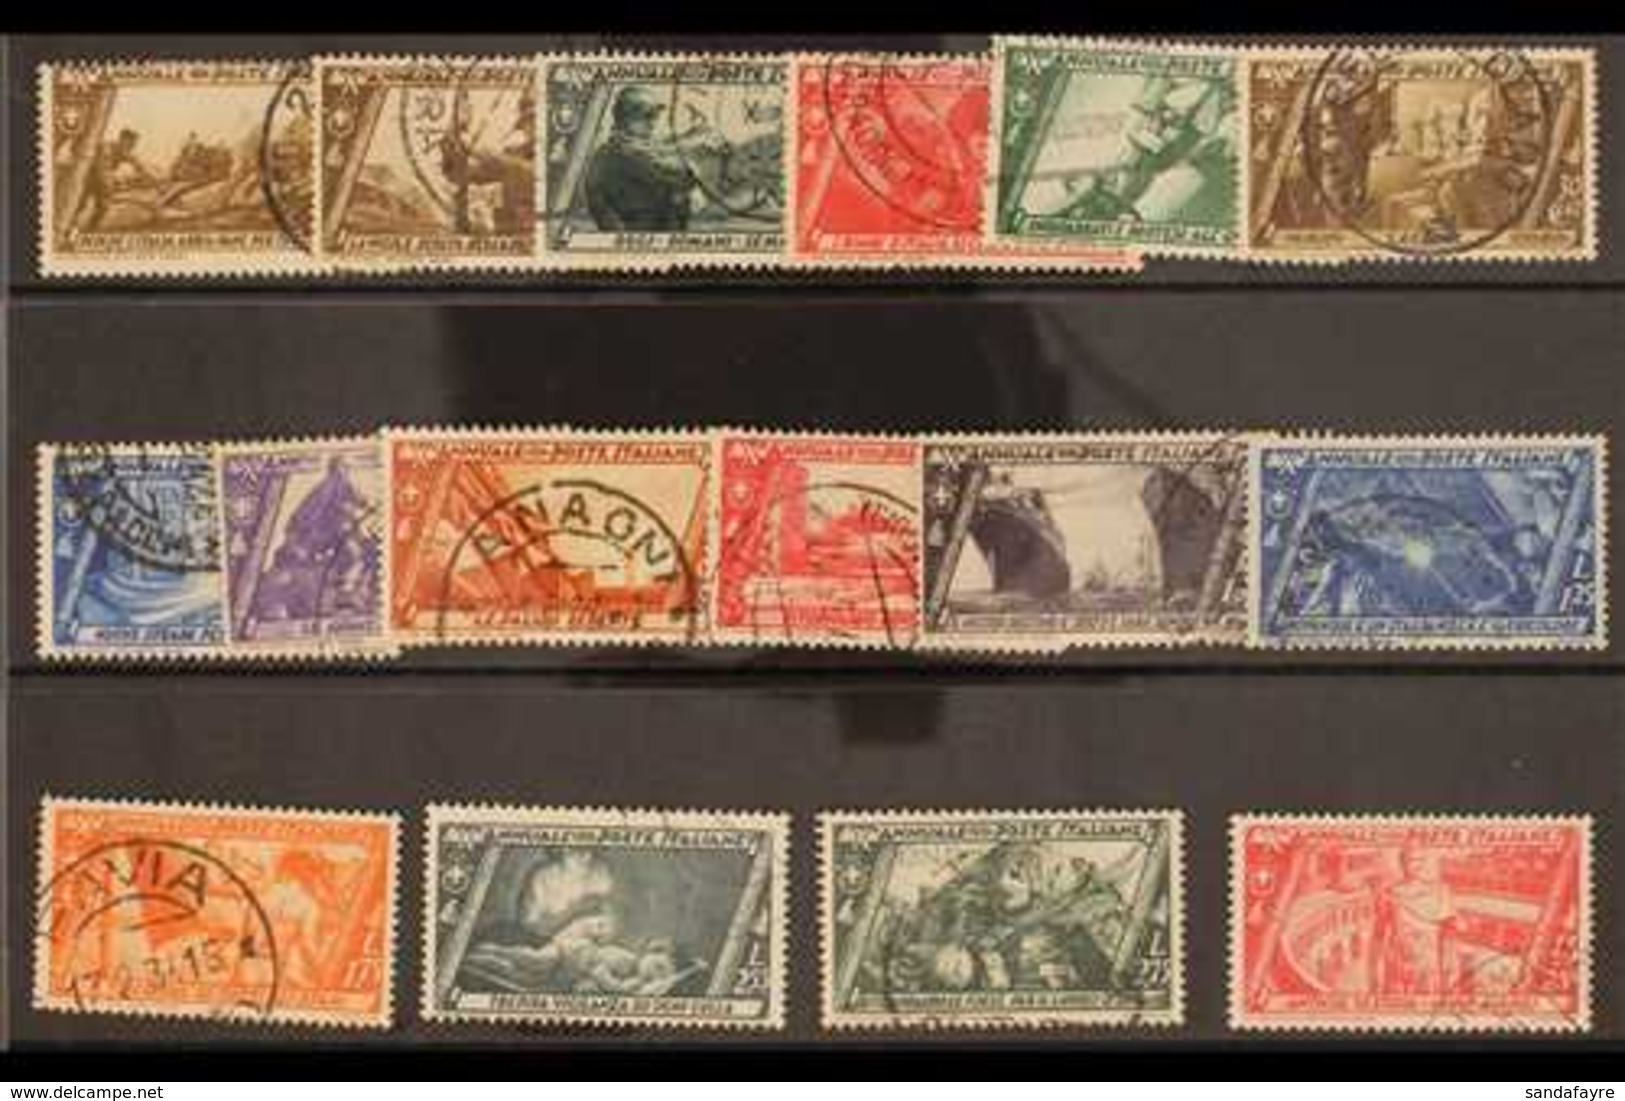 1932 Fascist March On Rome (Postage) Complete Set (Sass S. 65, SG 350/65) Used. (16 Stamps) For More Images, Please Visi - Non Classificati